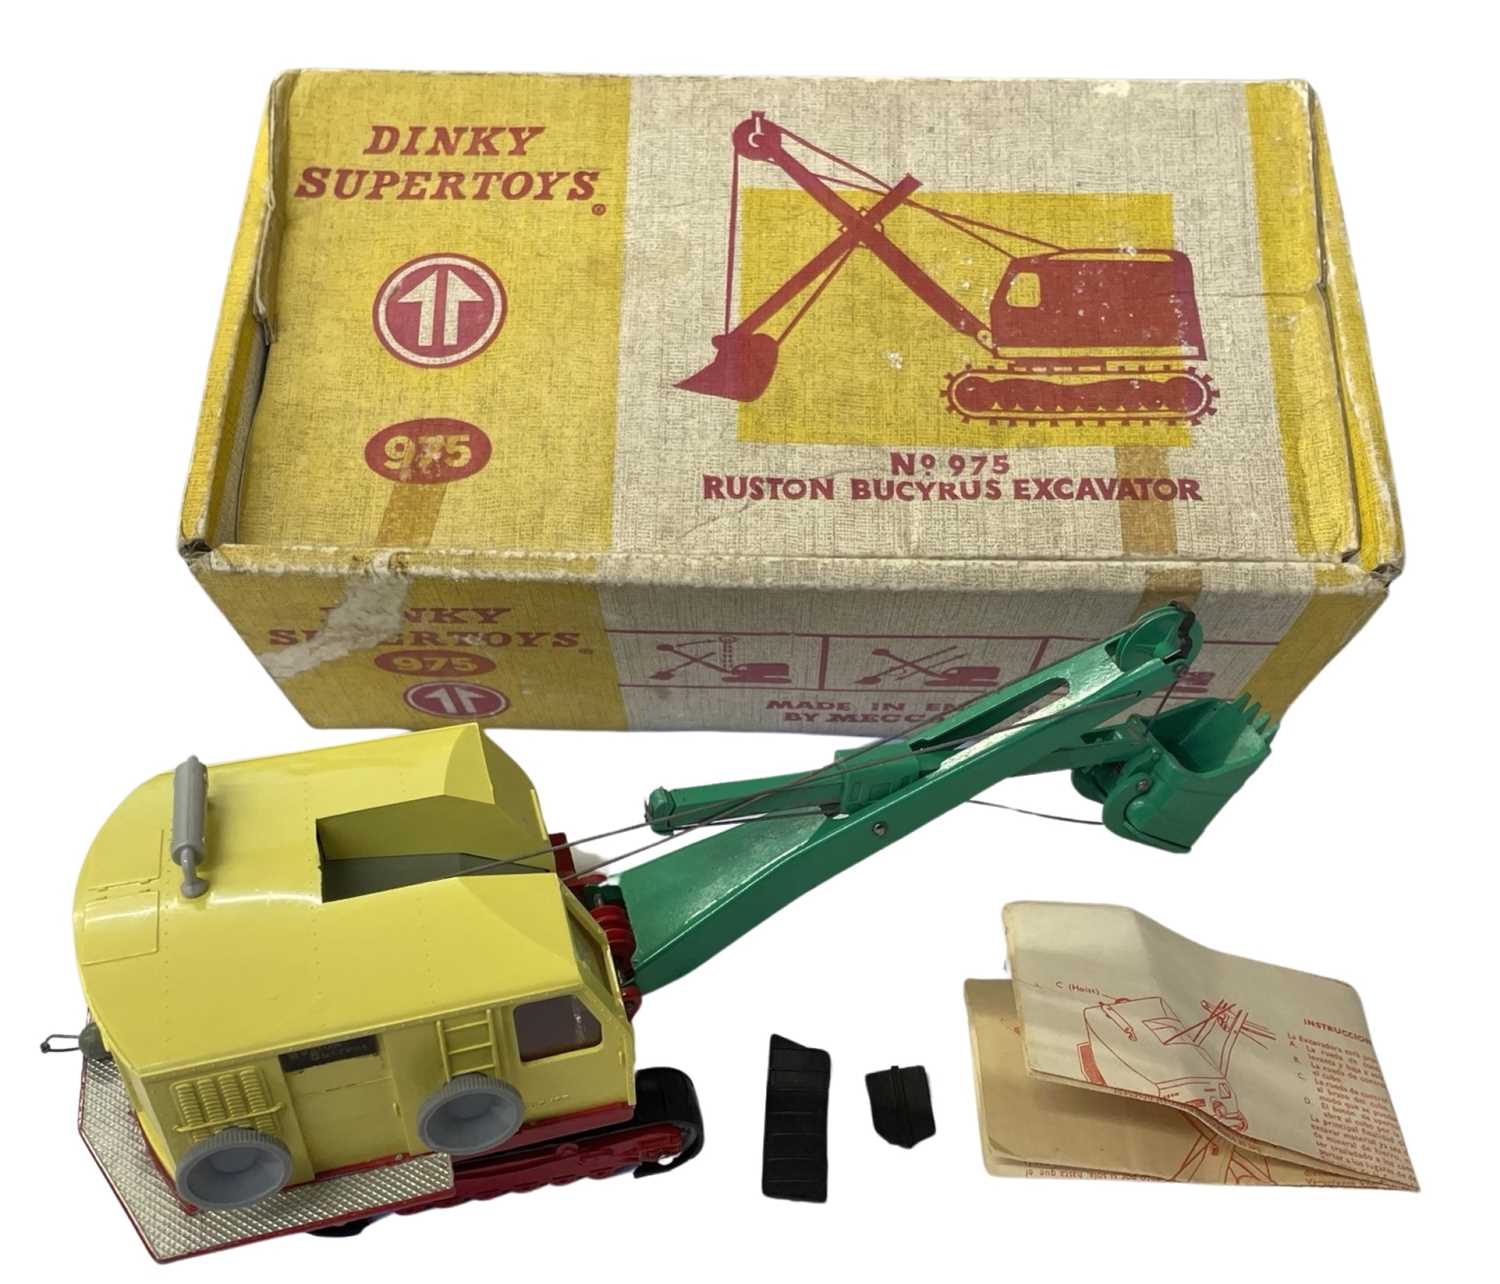 A boxed Dinky 975 Ruston Bucyrus Excavator